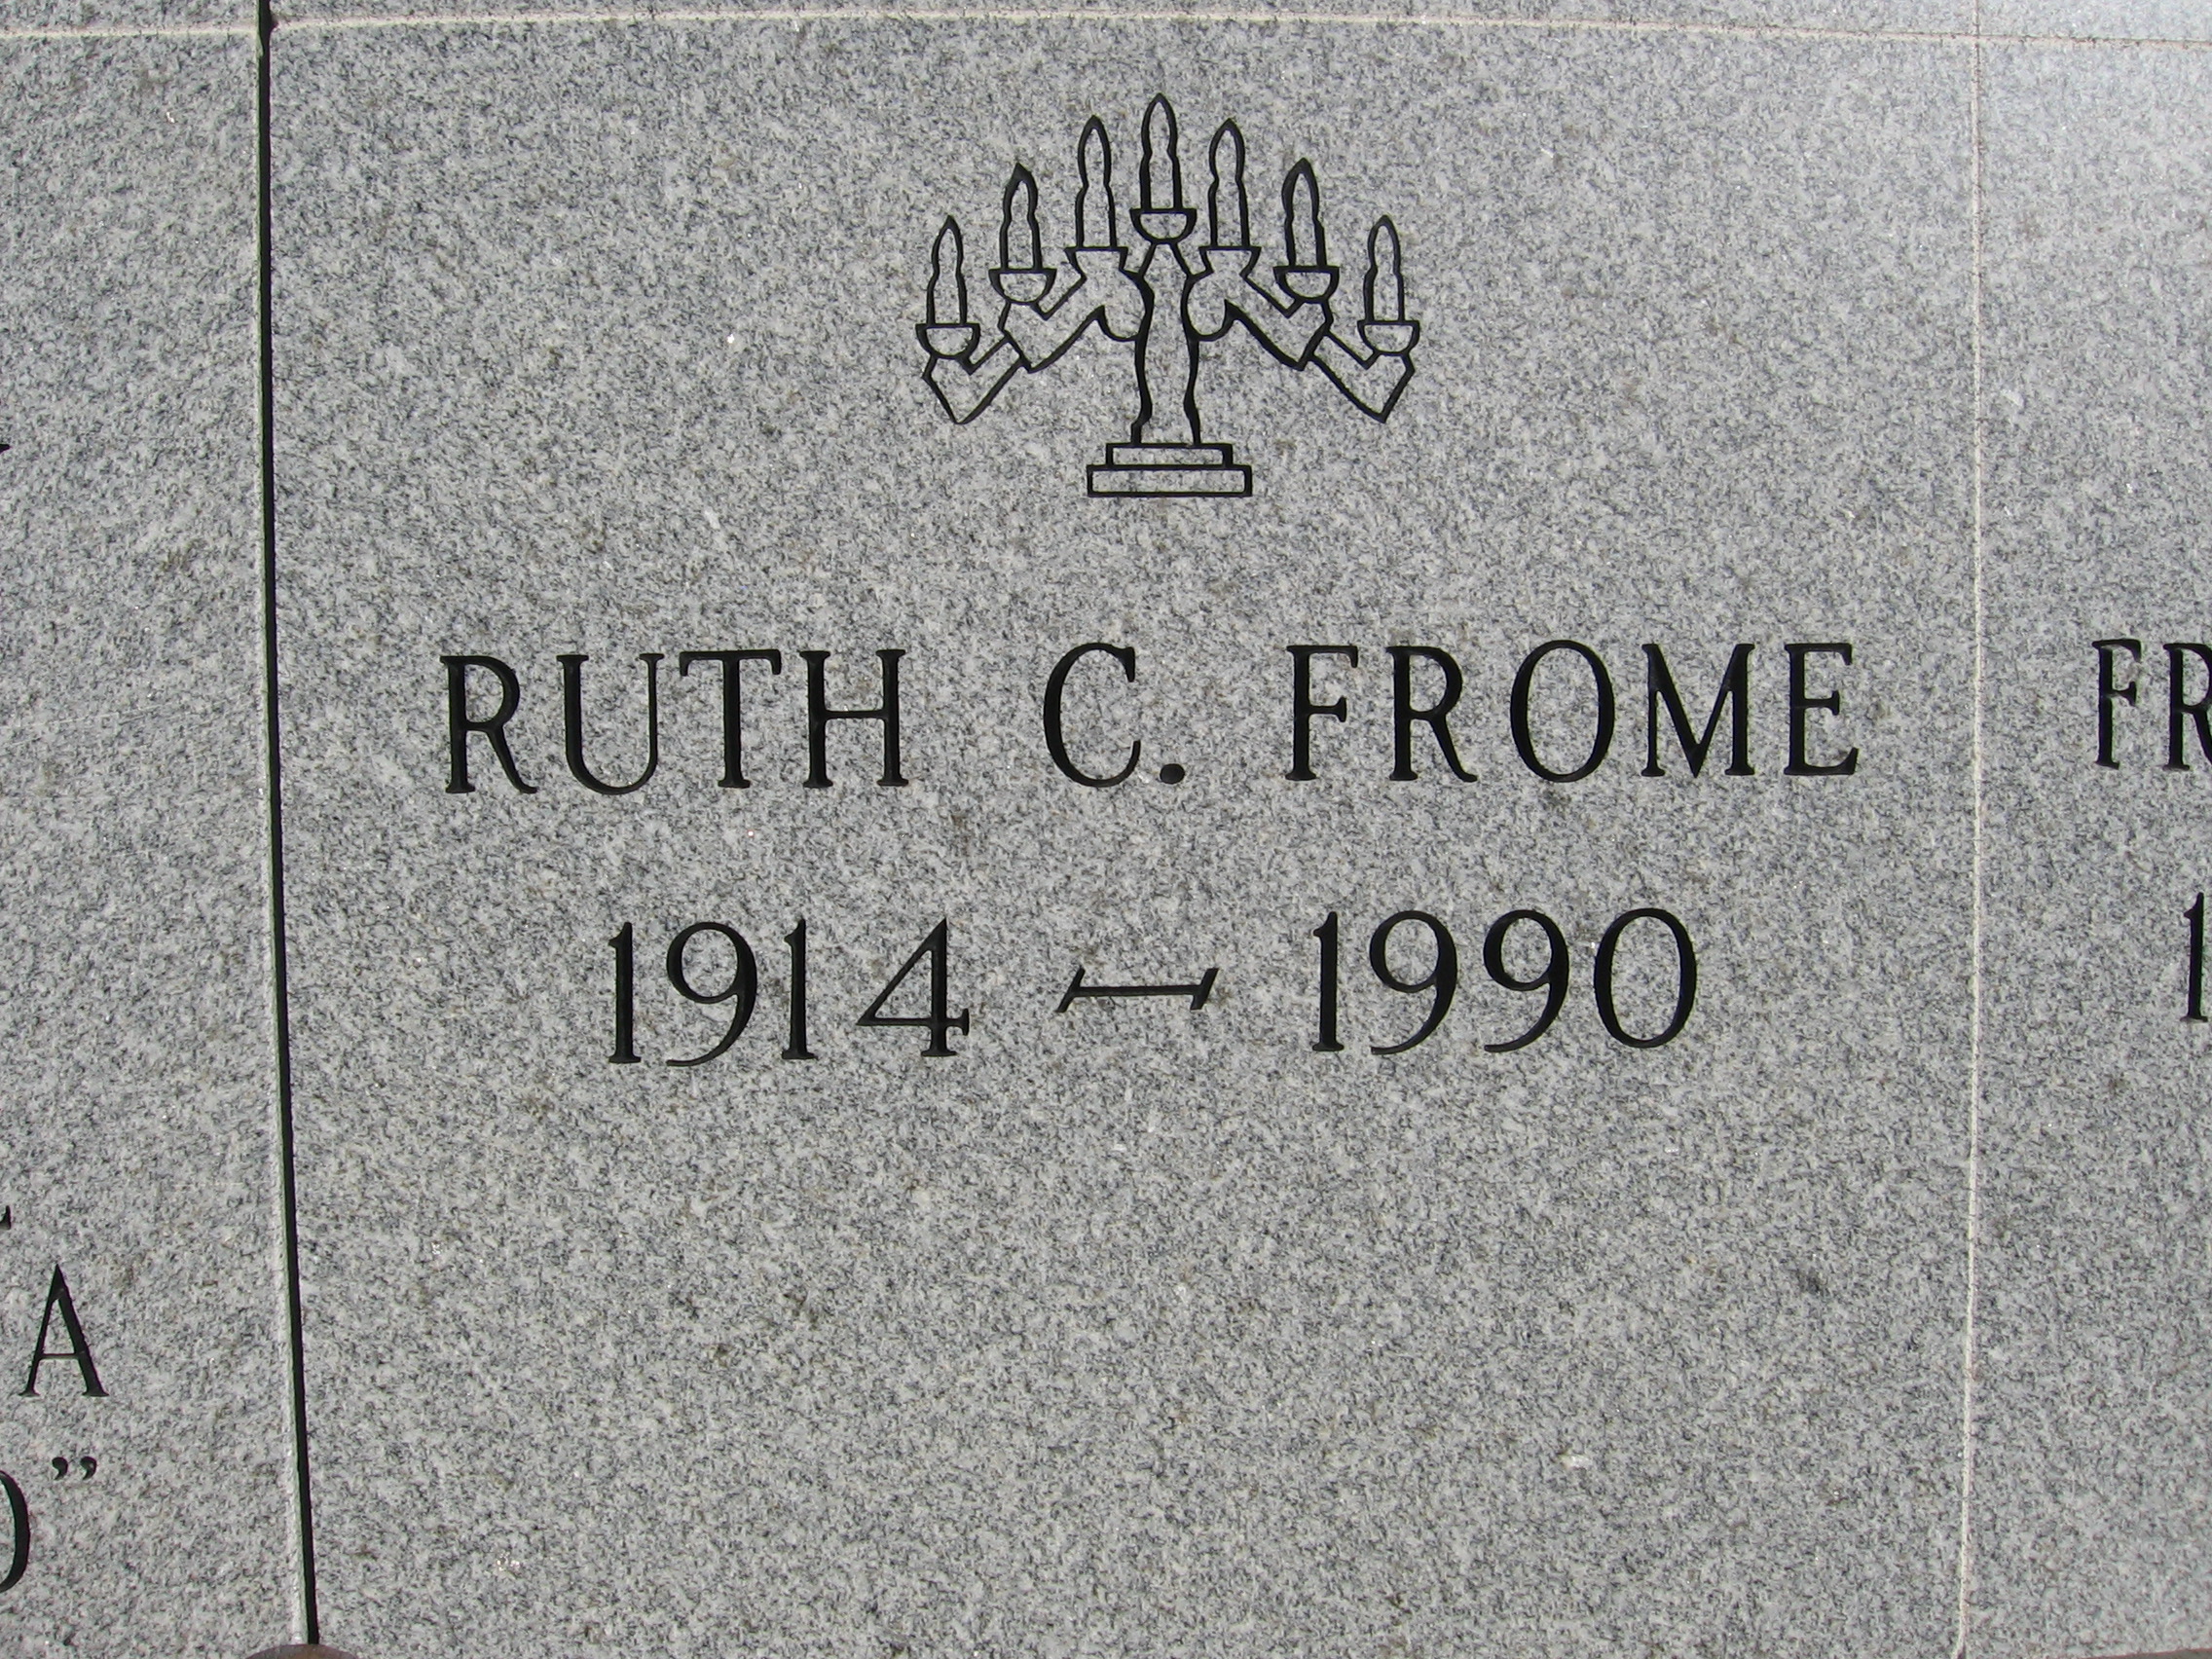 Ruth C Frome